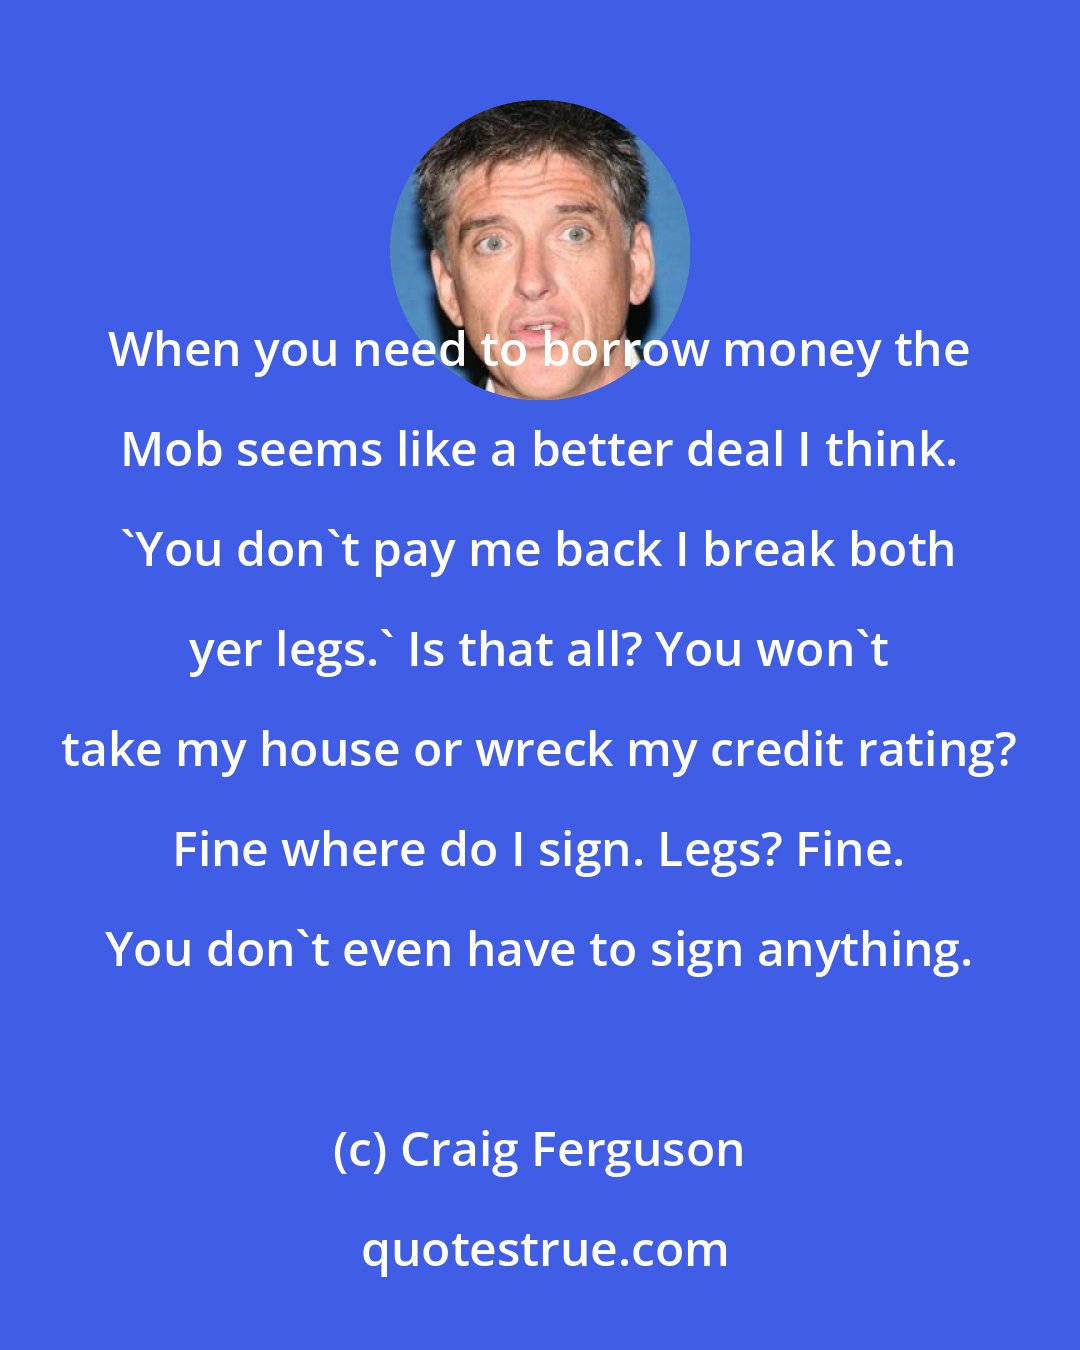 Craig Ferguson: When you need to borrow money the Mob seems like a better deal I think. 'You don't pay me back I break both yer legs.' Is that all? You won't take my house or wreck my credit rating? Fine where do I sign. Legs? Fine. You don't even have to sign anything.